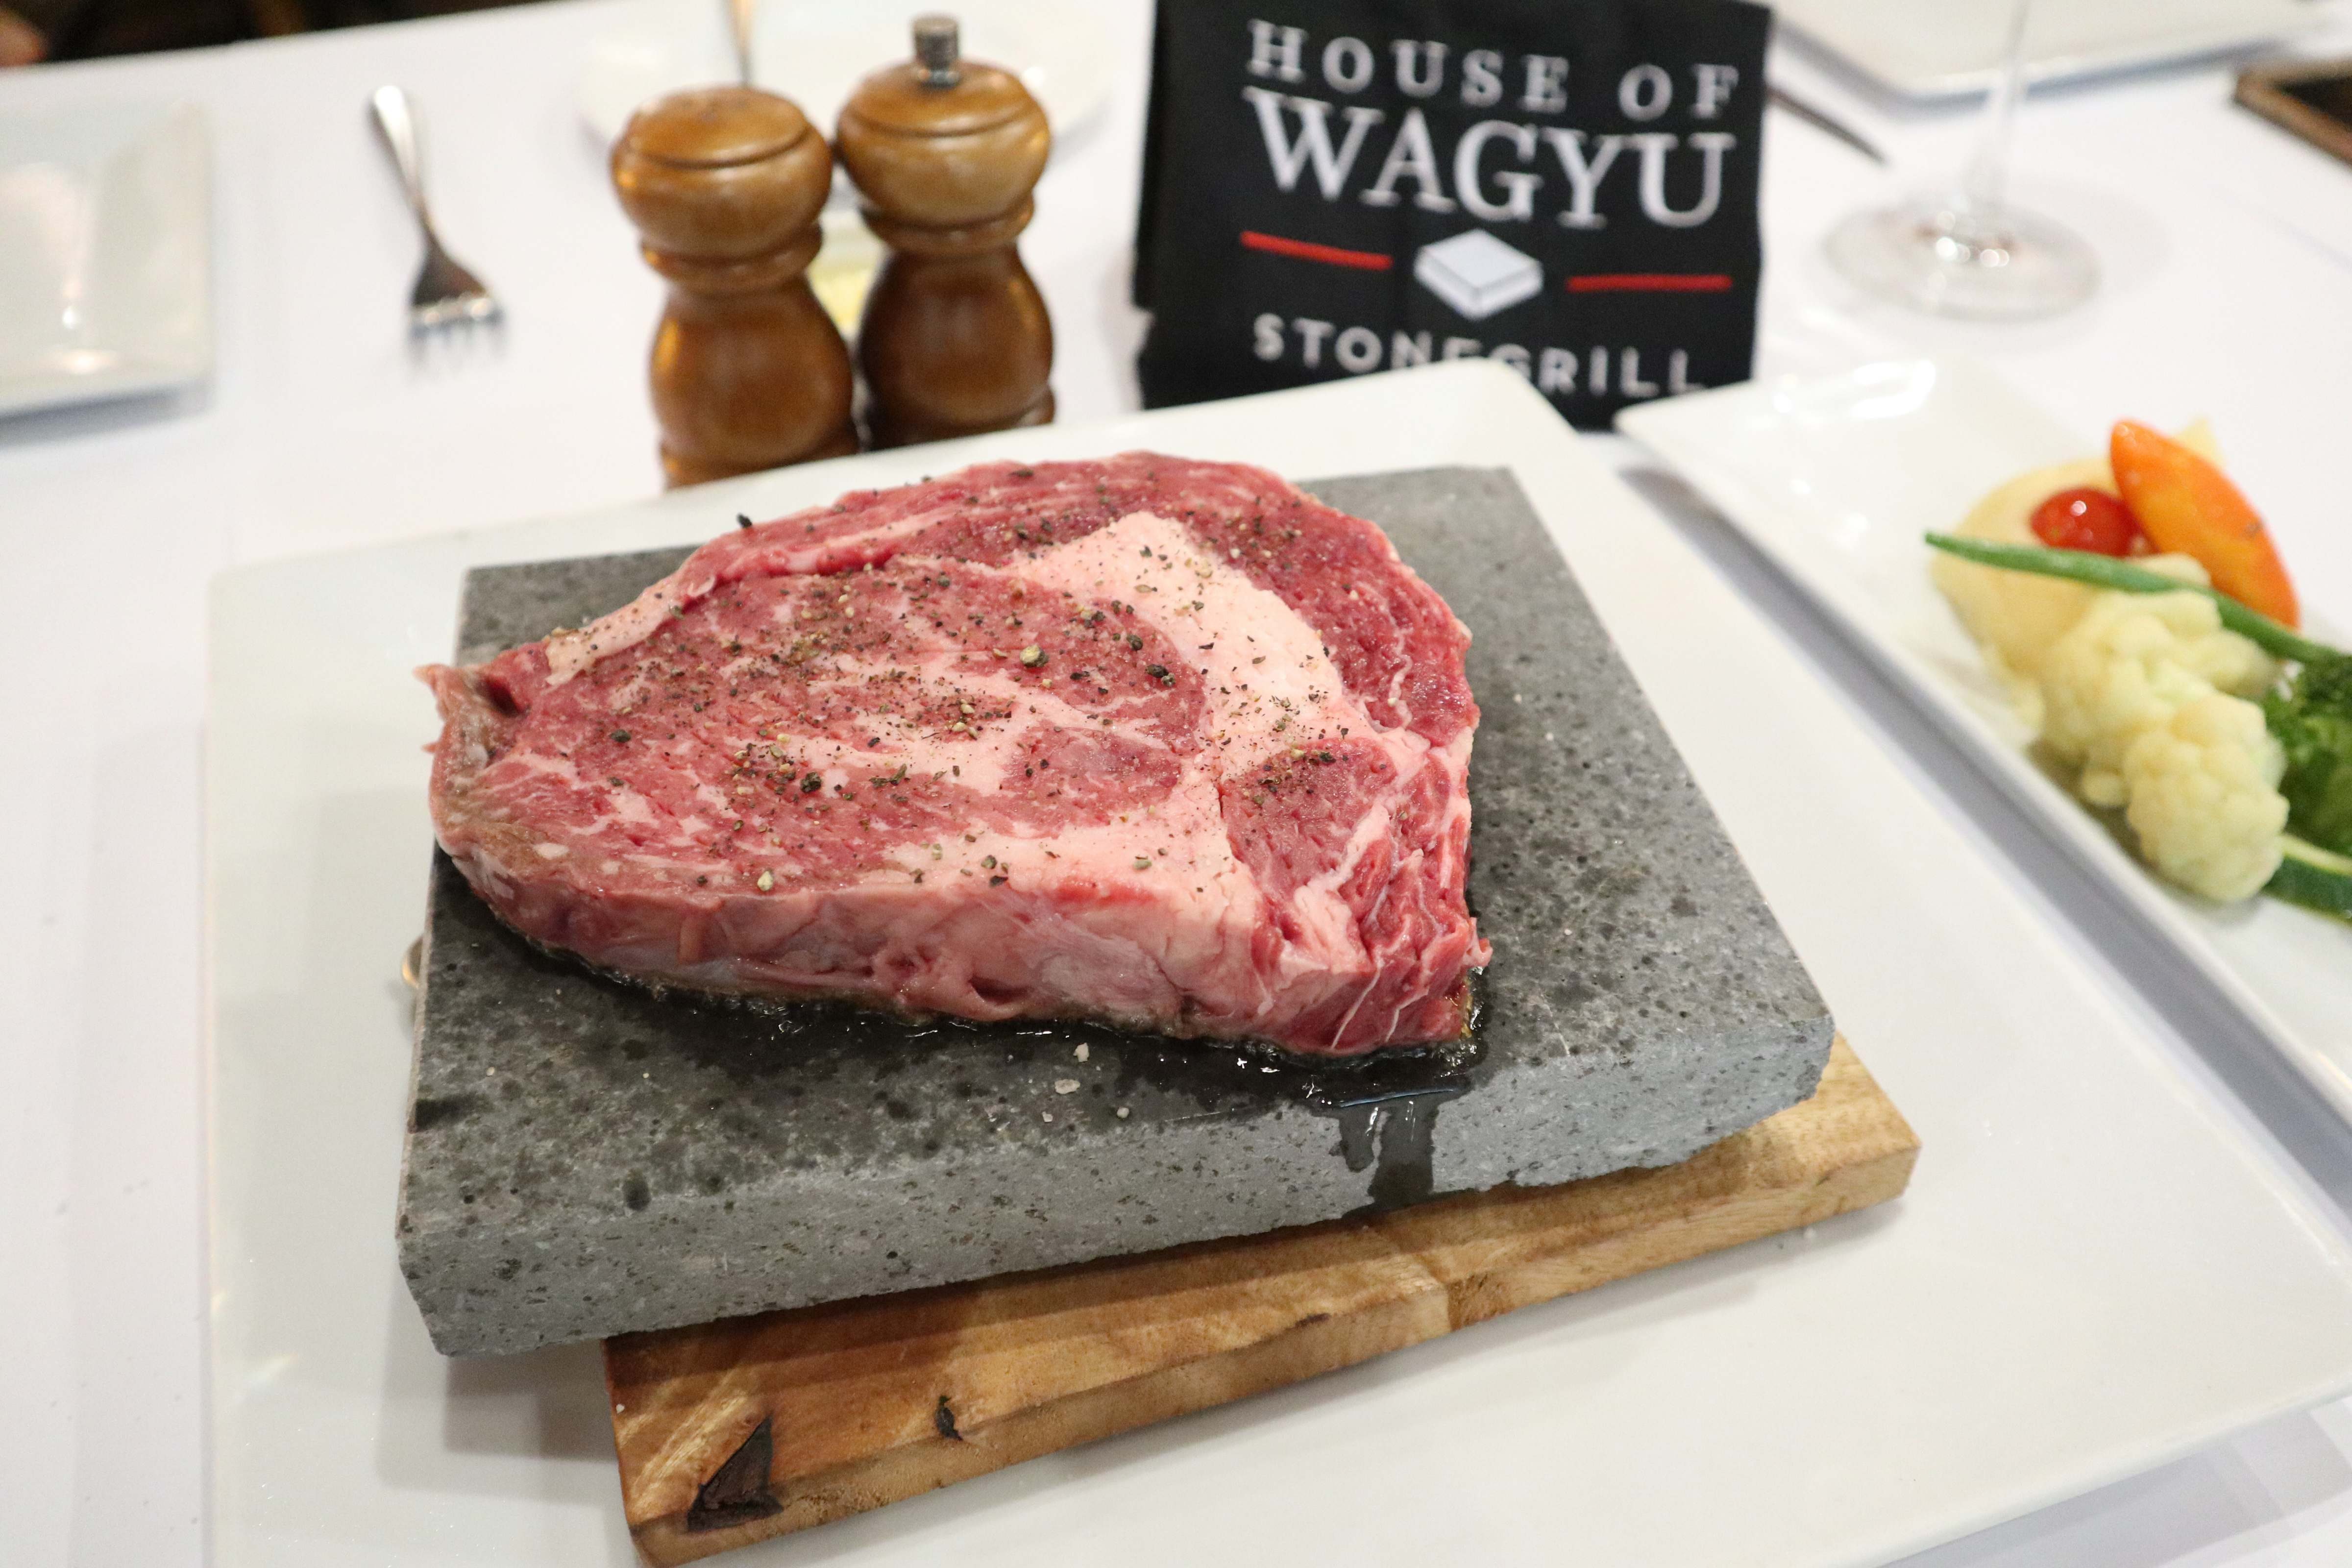 TENDER TO THE BONE. House of Wagyu's stone grilled steak 